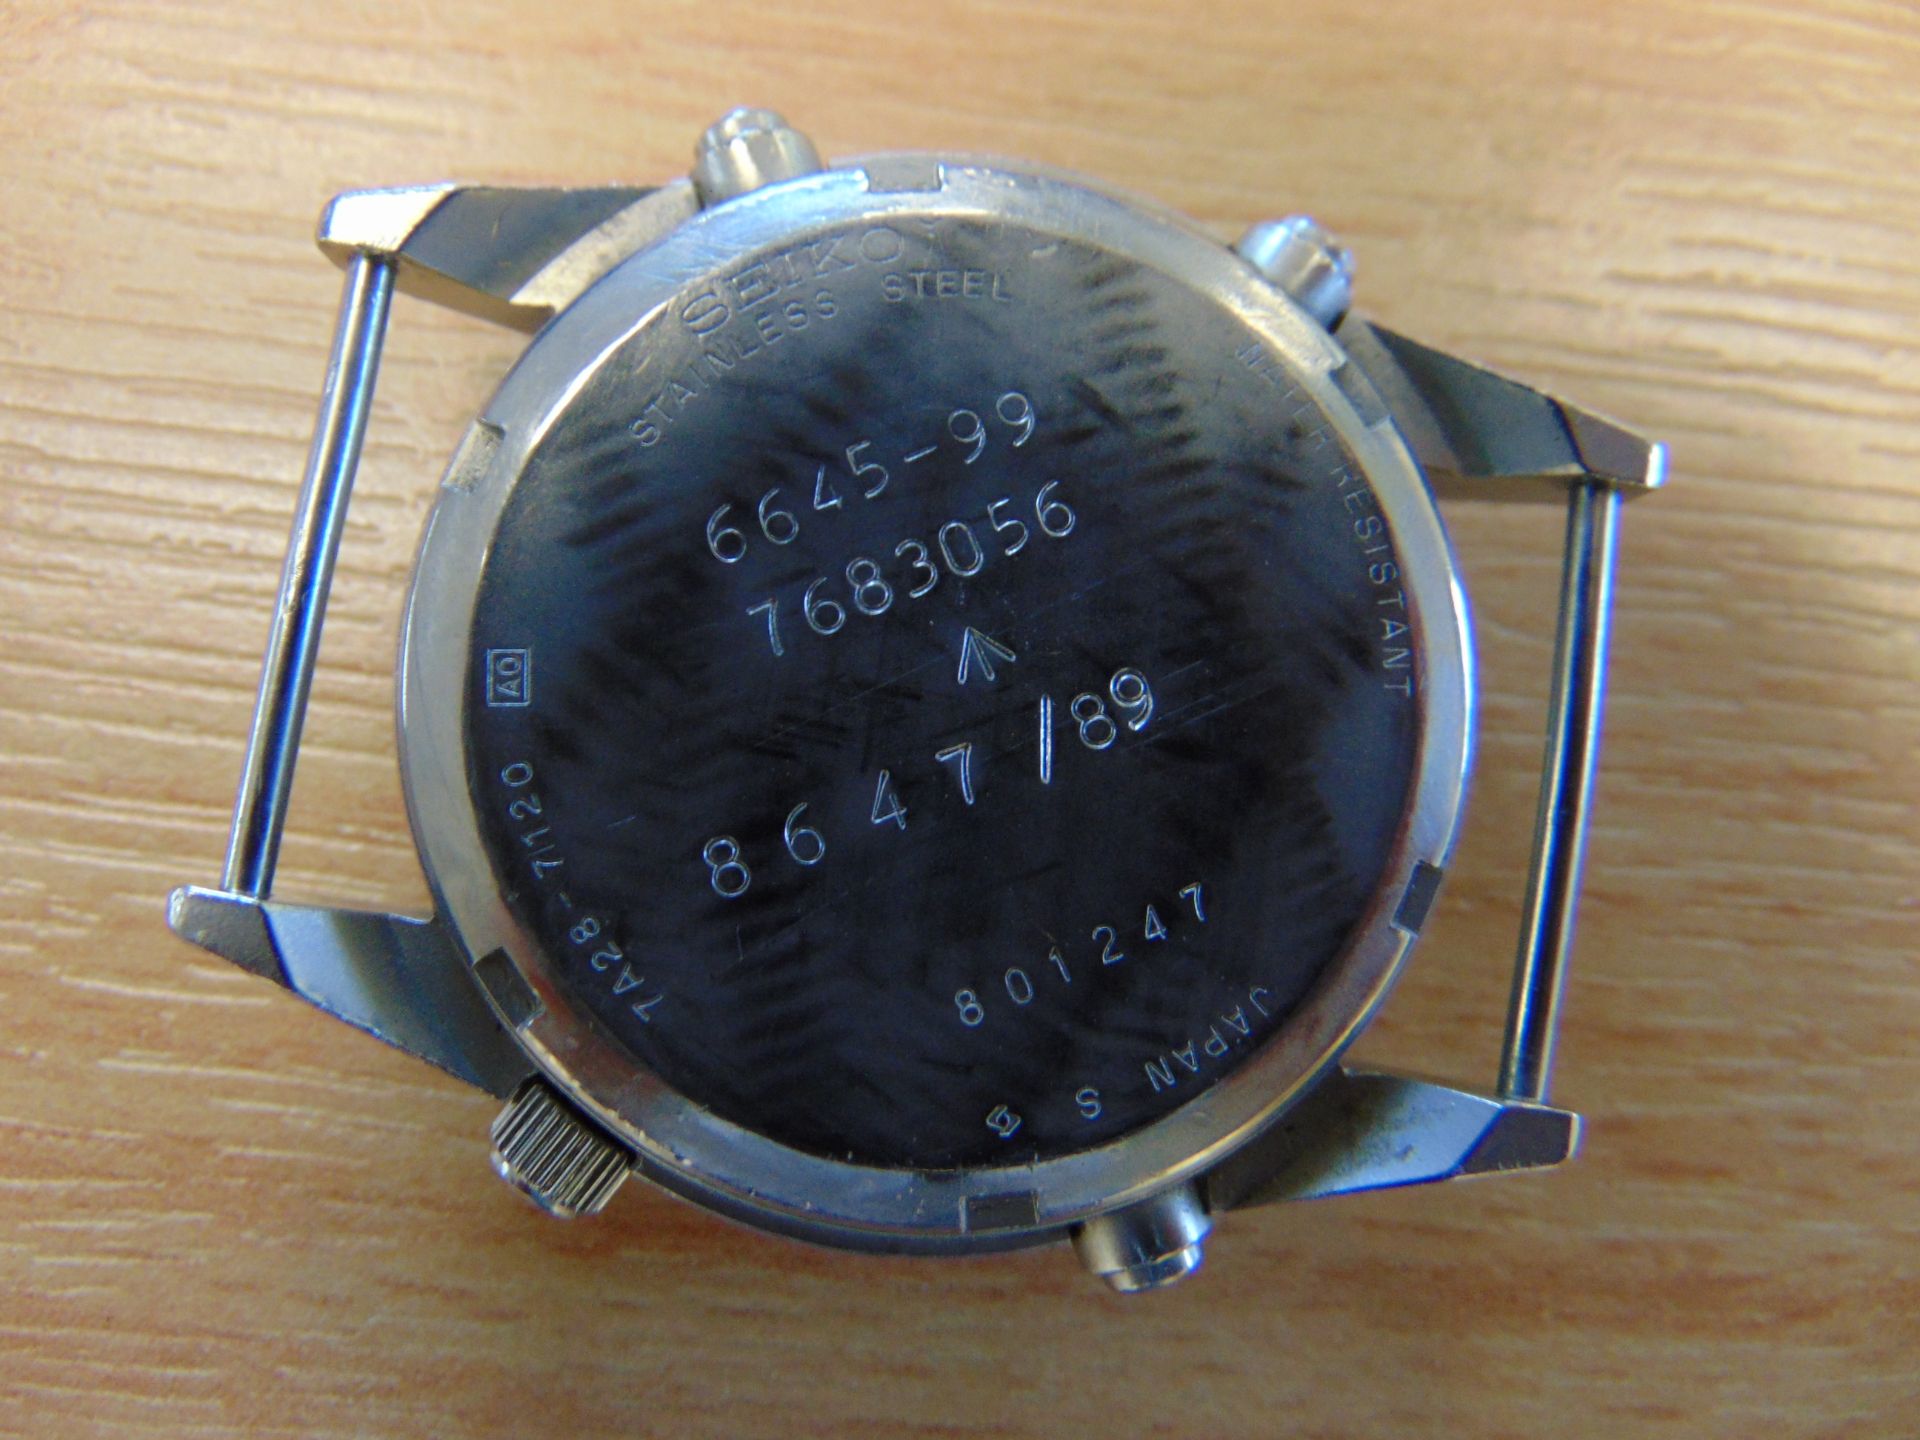 Seiko Gen 1 Pilots Chrono RAF Harrier Force Issue with Nato Marks, Date 1989 - Image 5 of 6